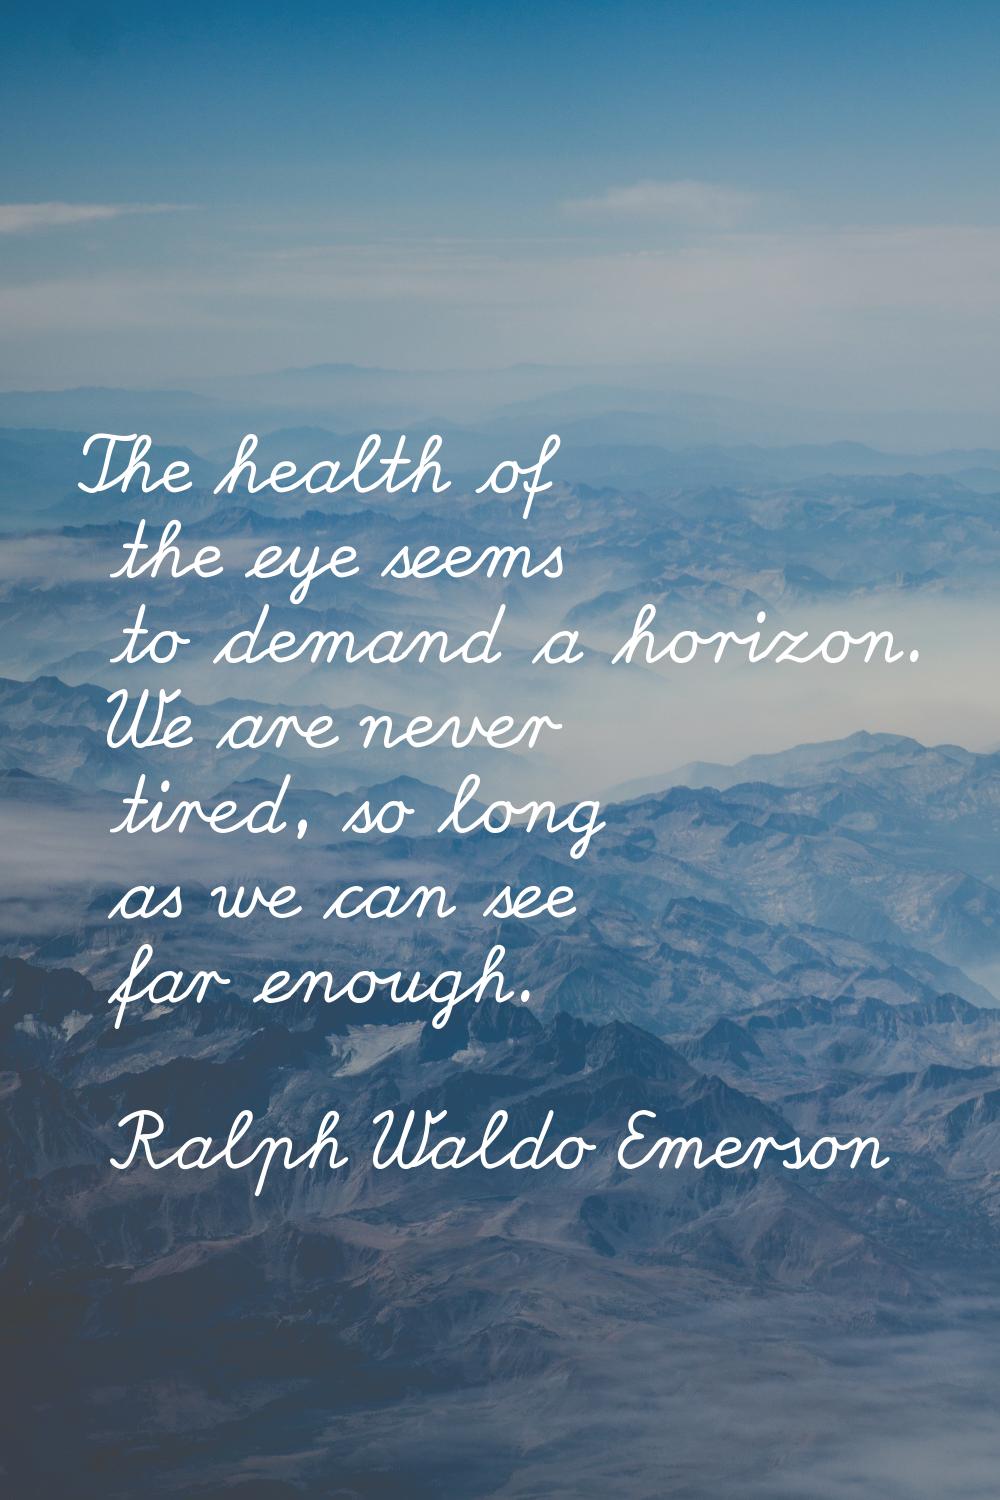 The health of the eye seems to demand a horizon. We are never tired, so long as we can see far enou